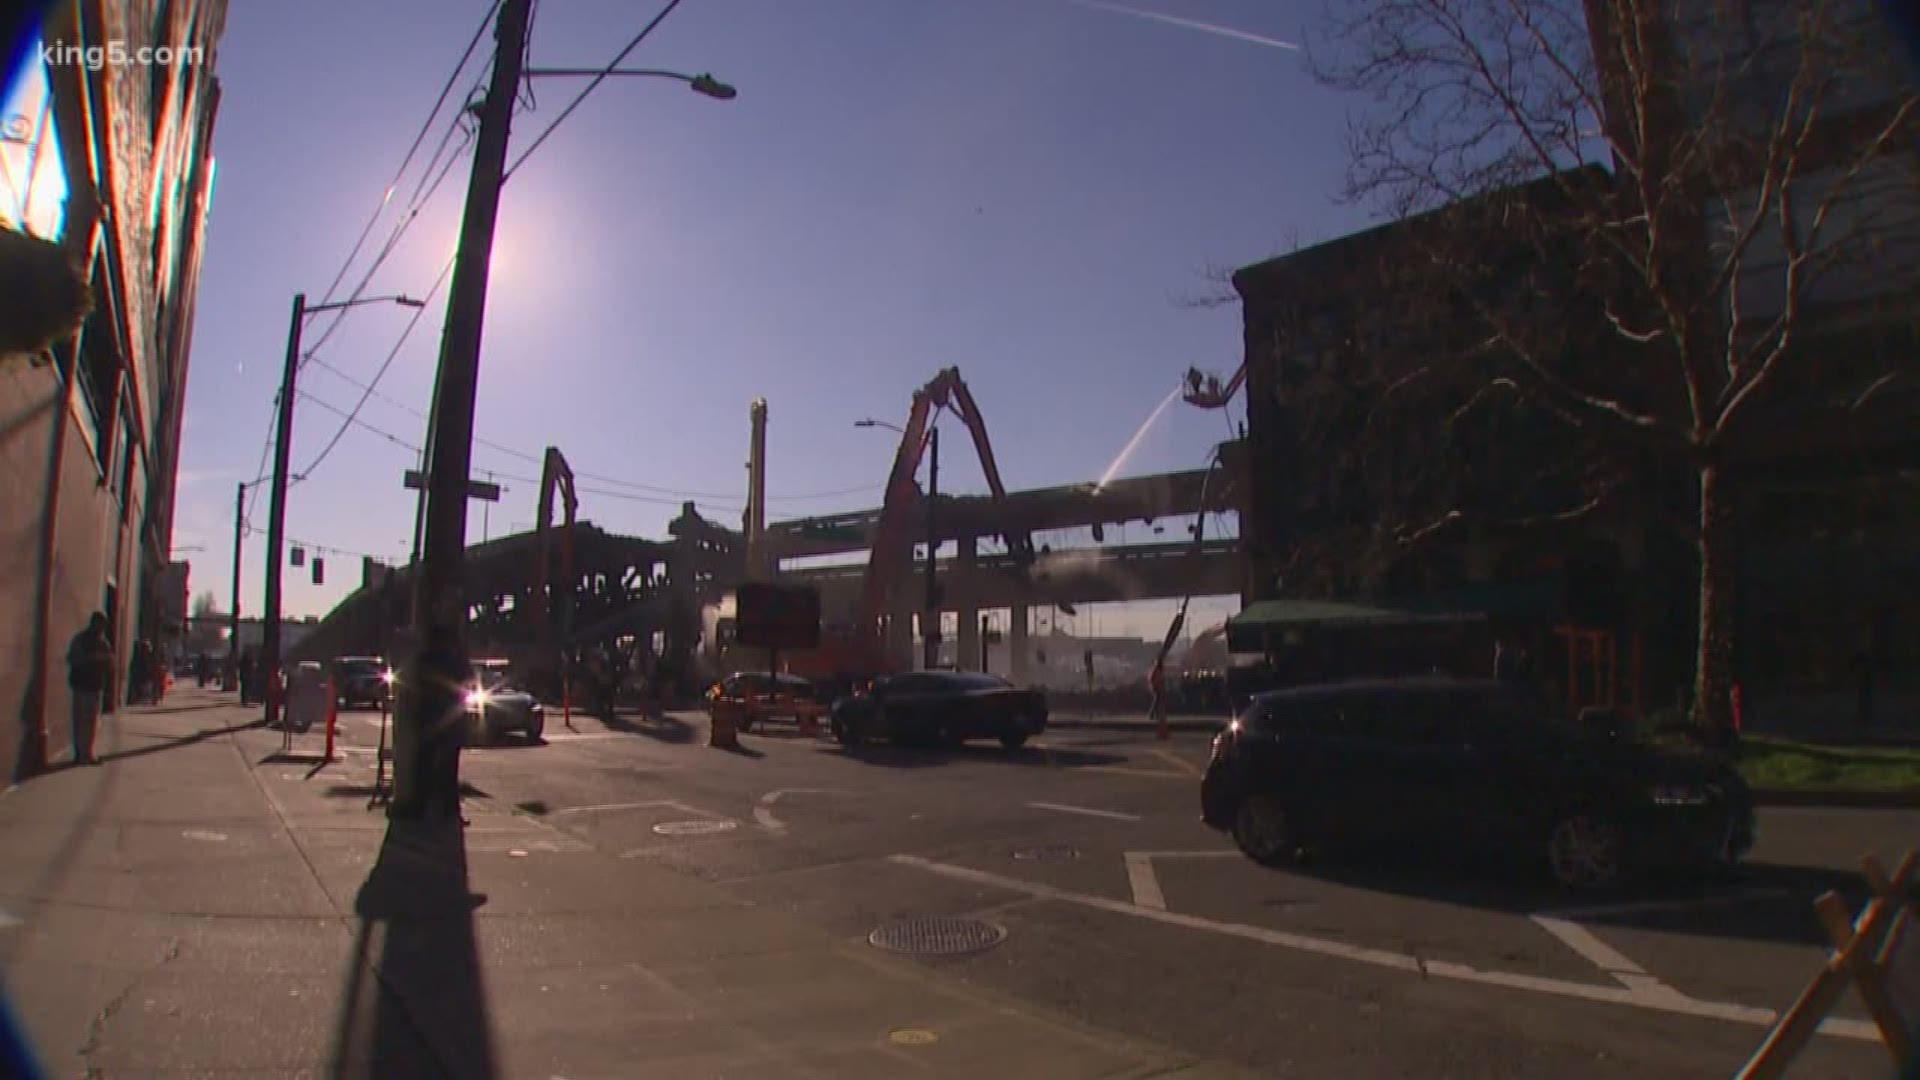 Crews were out Saturday demolishing a ramp connected to the Alaskan Way Viaduct.